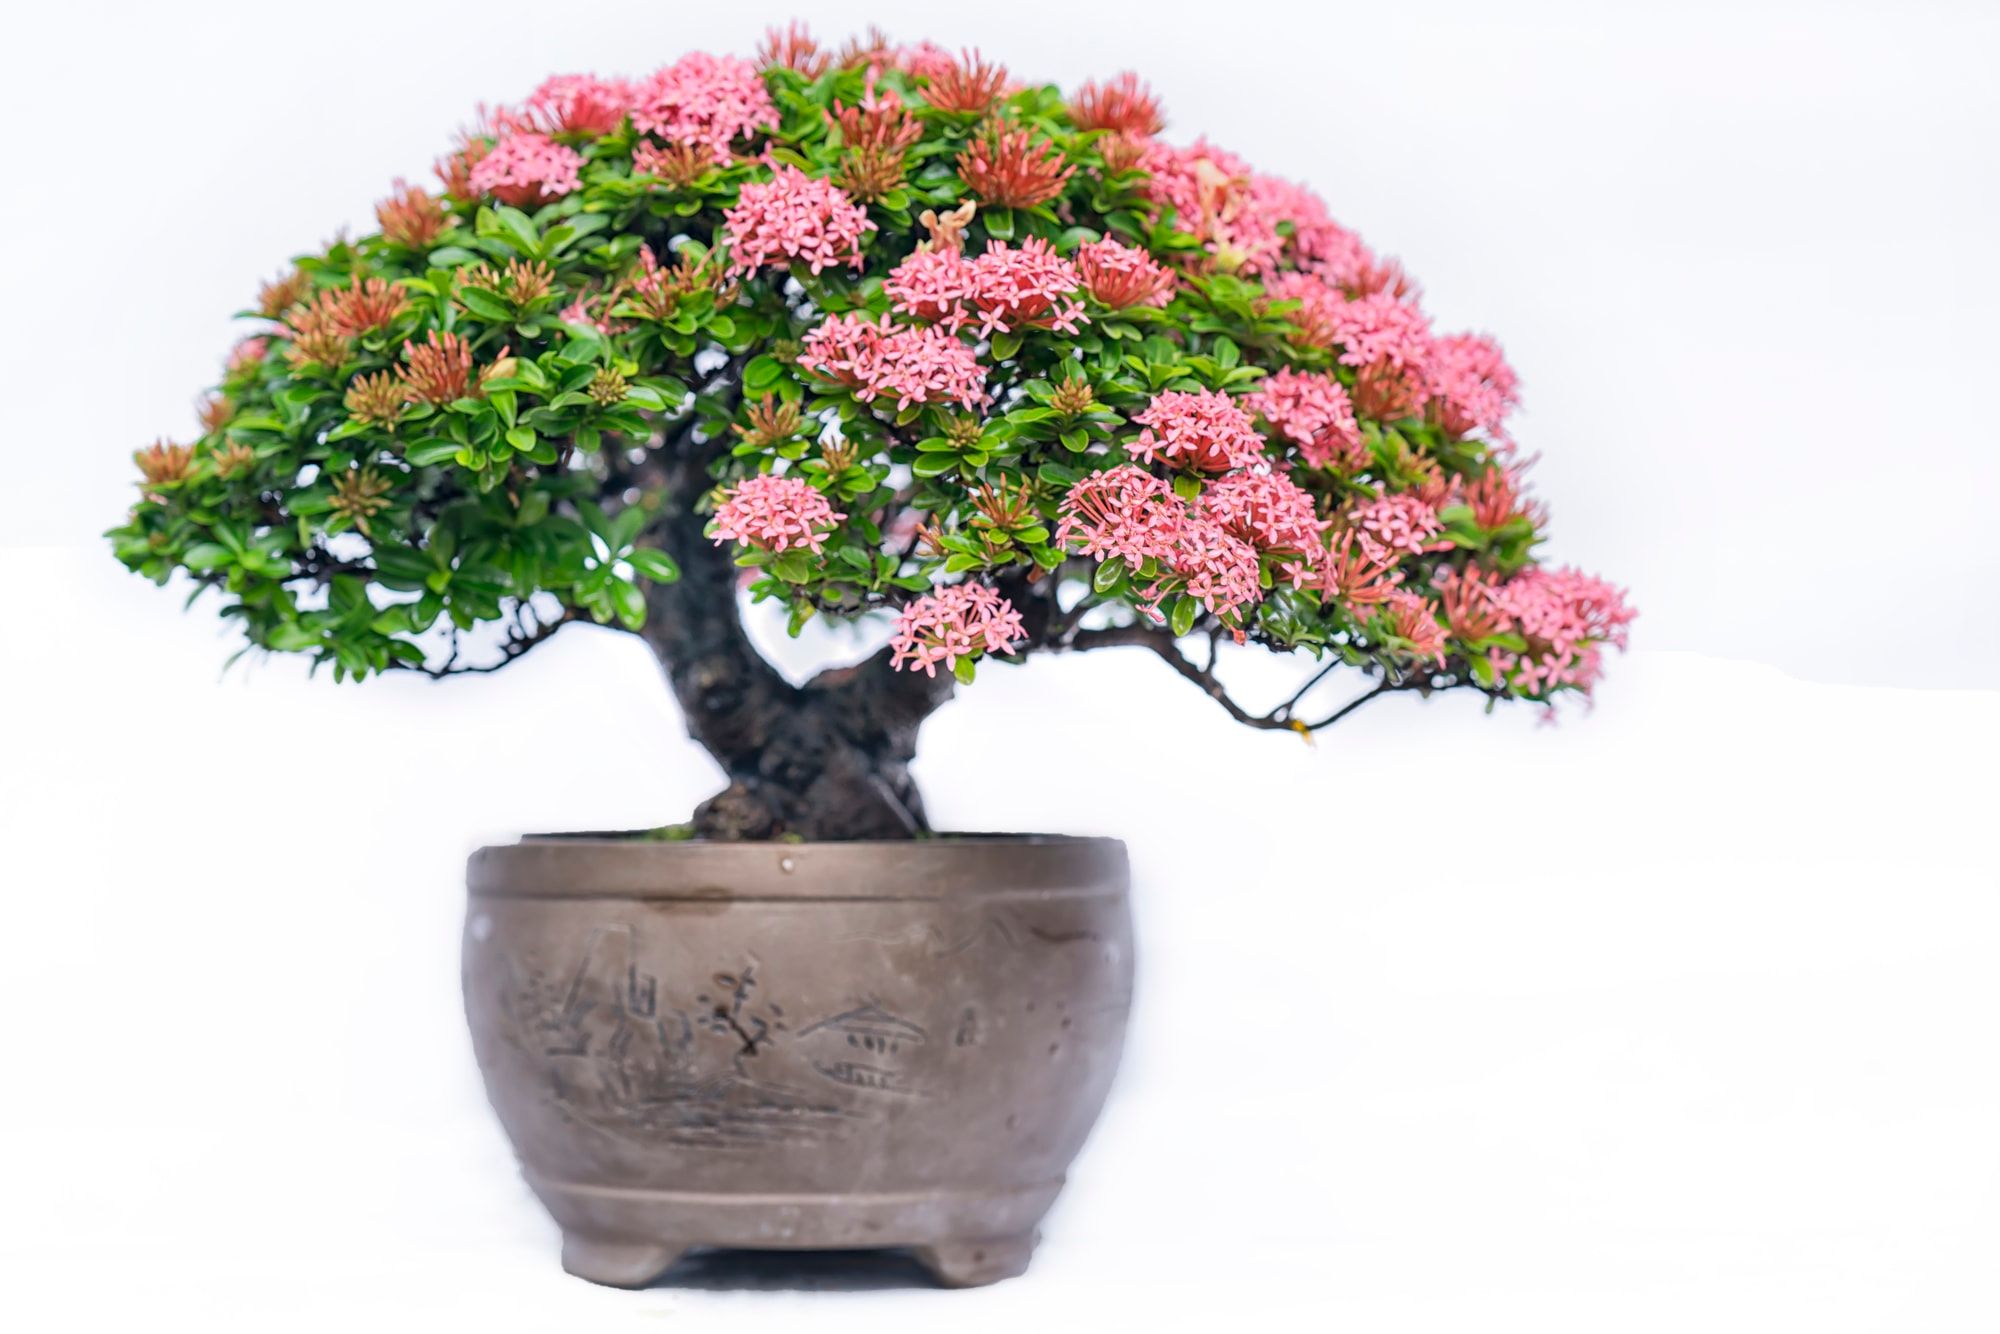 Bonsai planted in a vintage type of rounded pot blooming in pinkish flowers